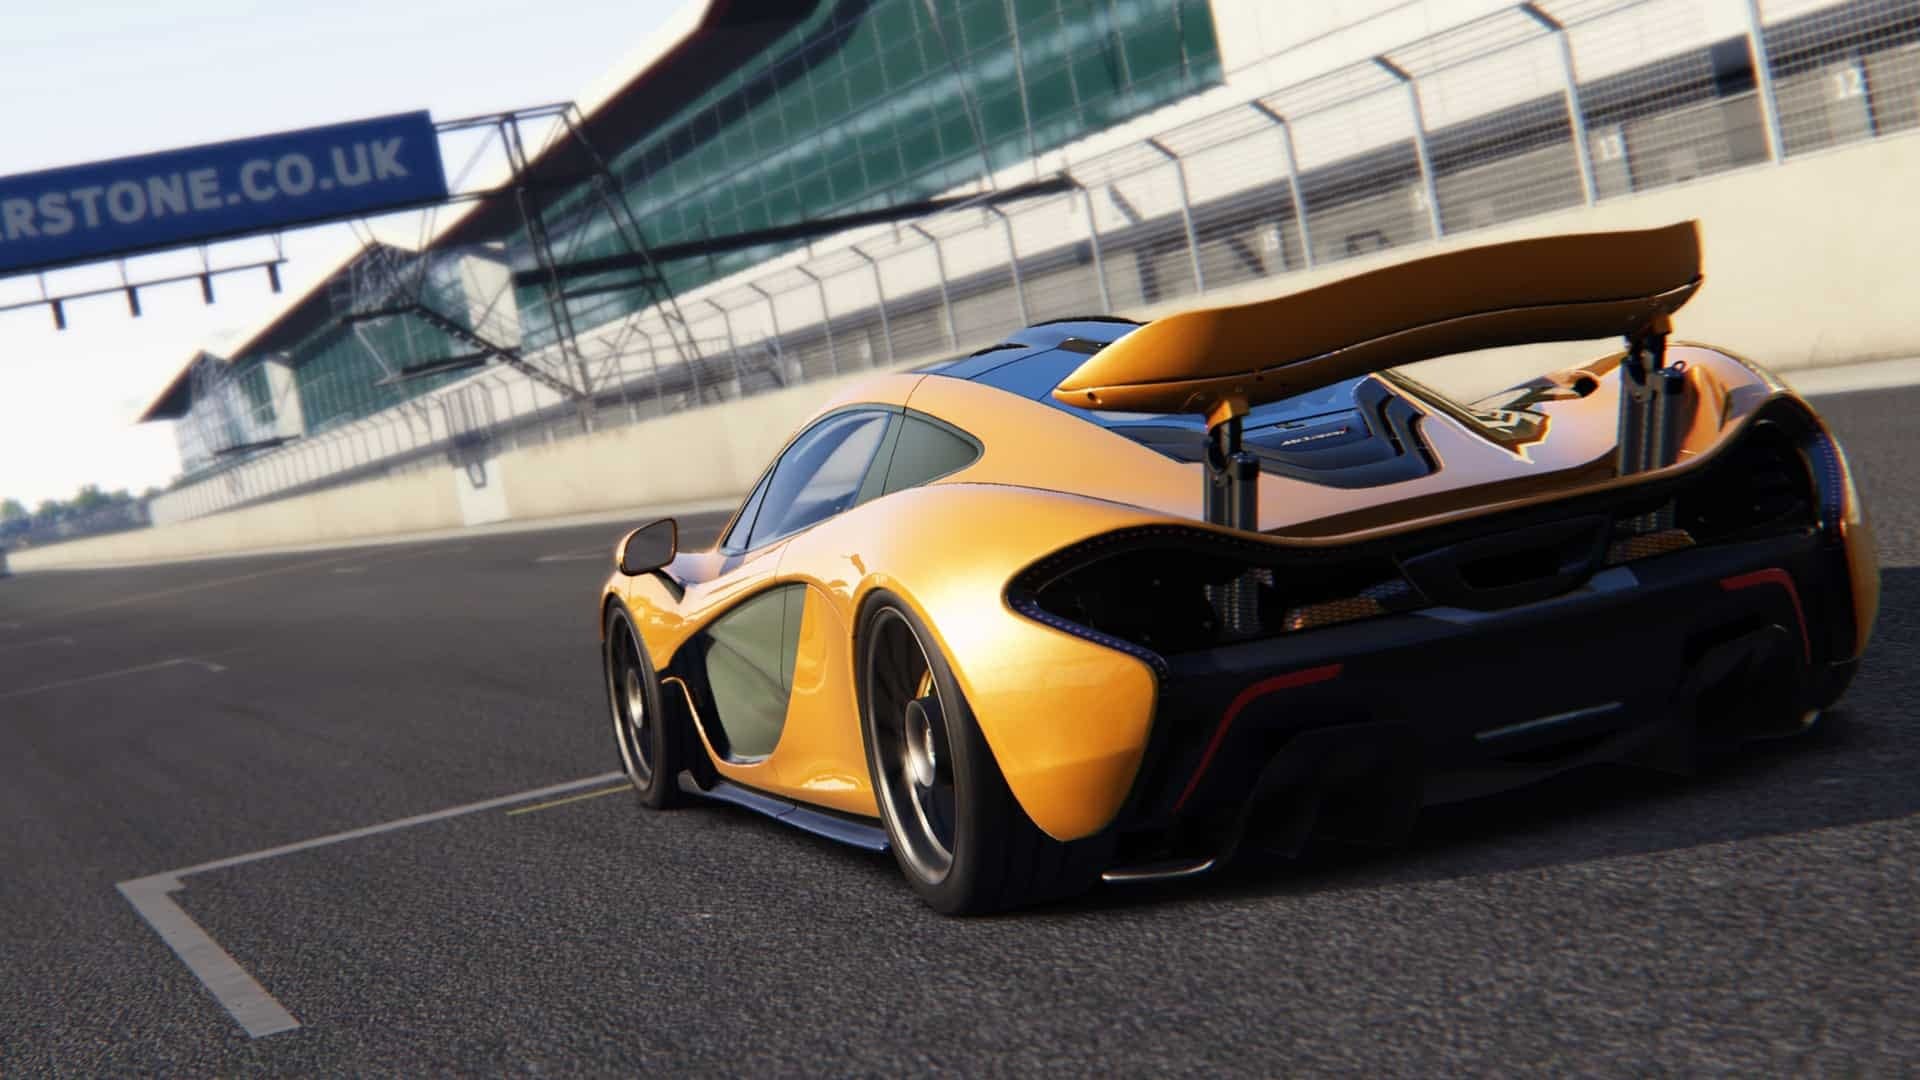 Assetto Corsa 2 is reported to be released in 2024